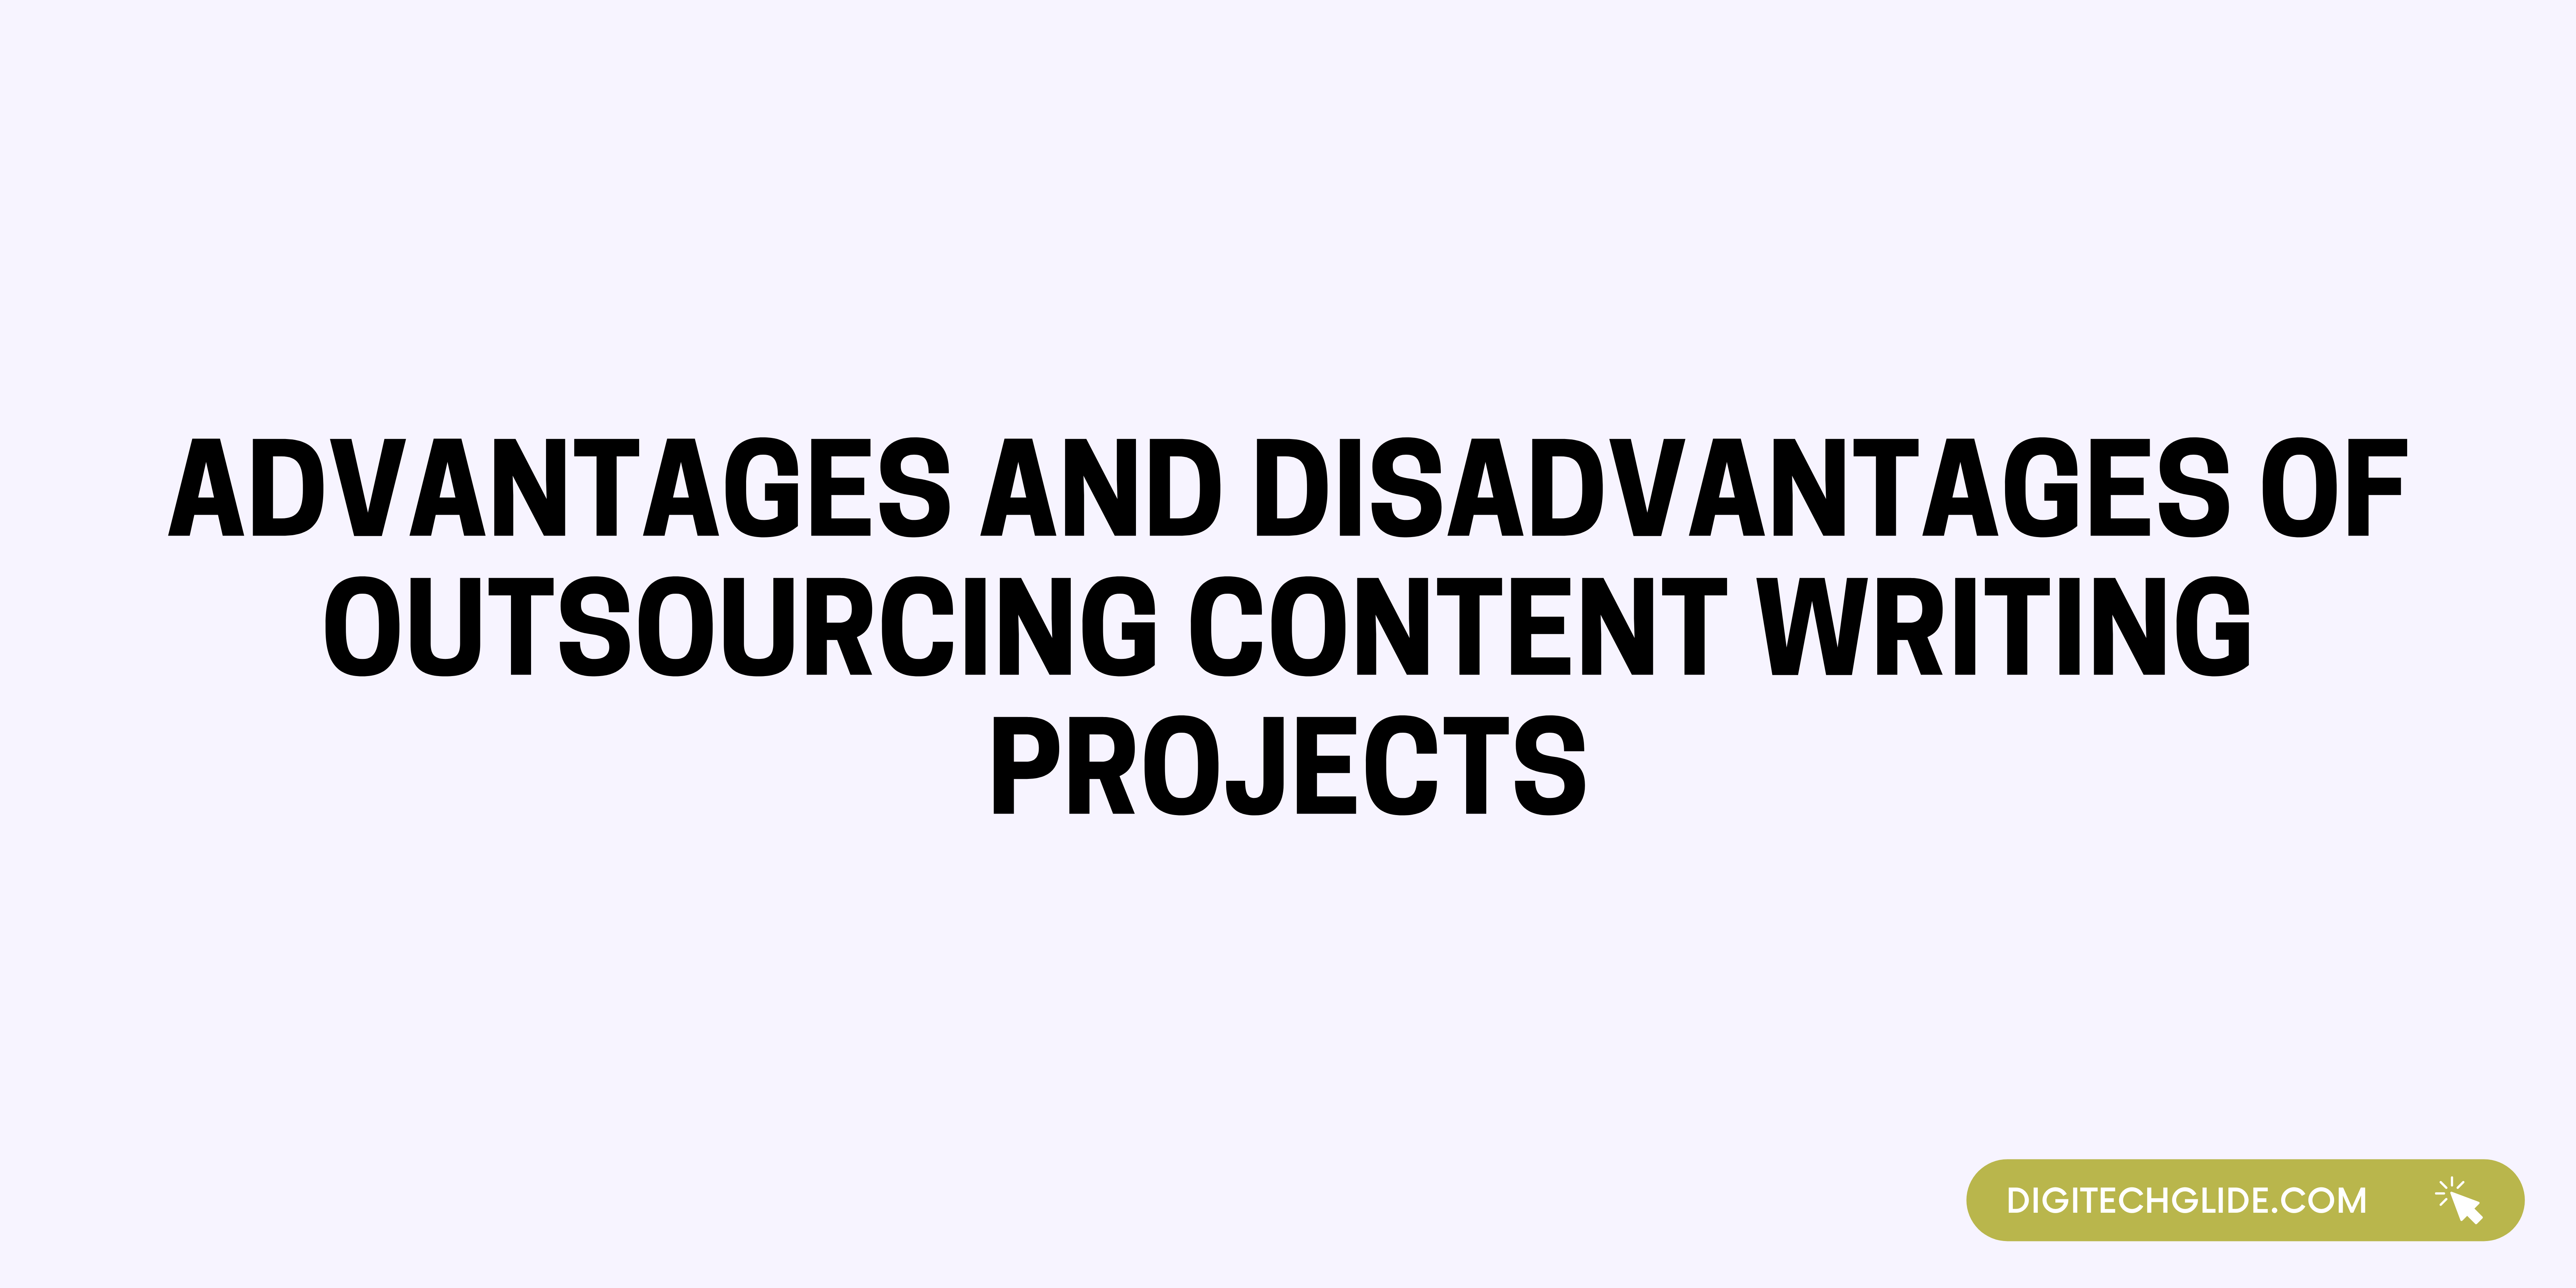 Advantages and Disadvantages of Outsourcing Content Writing Projects